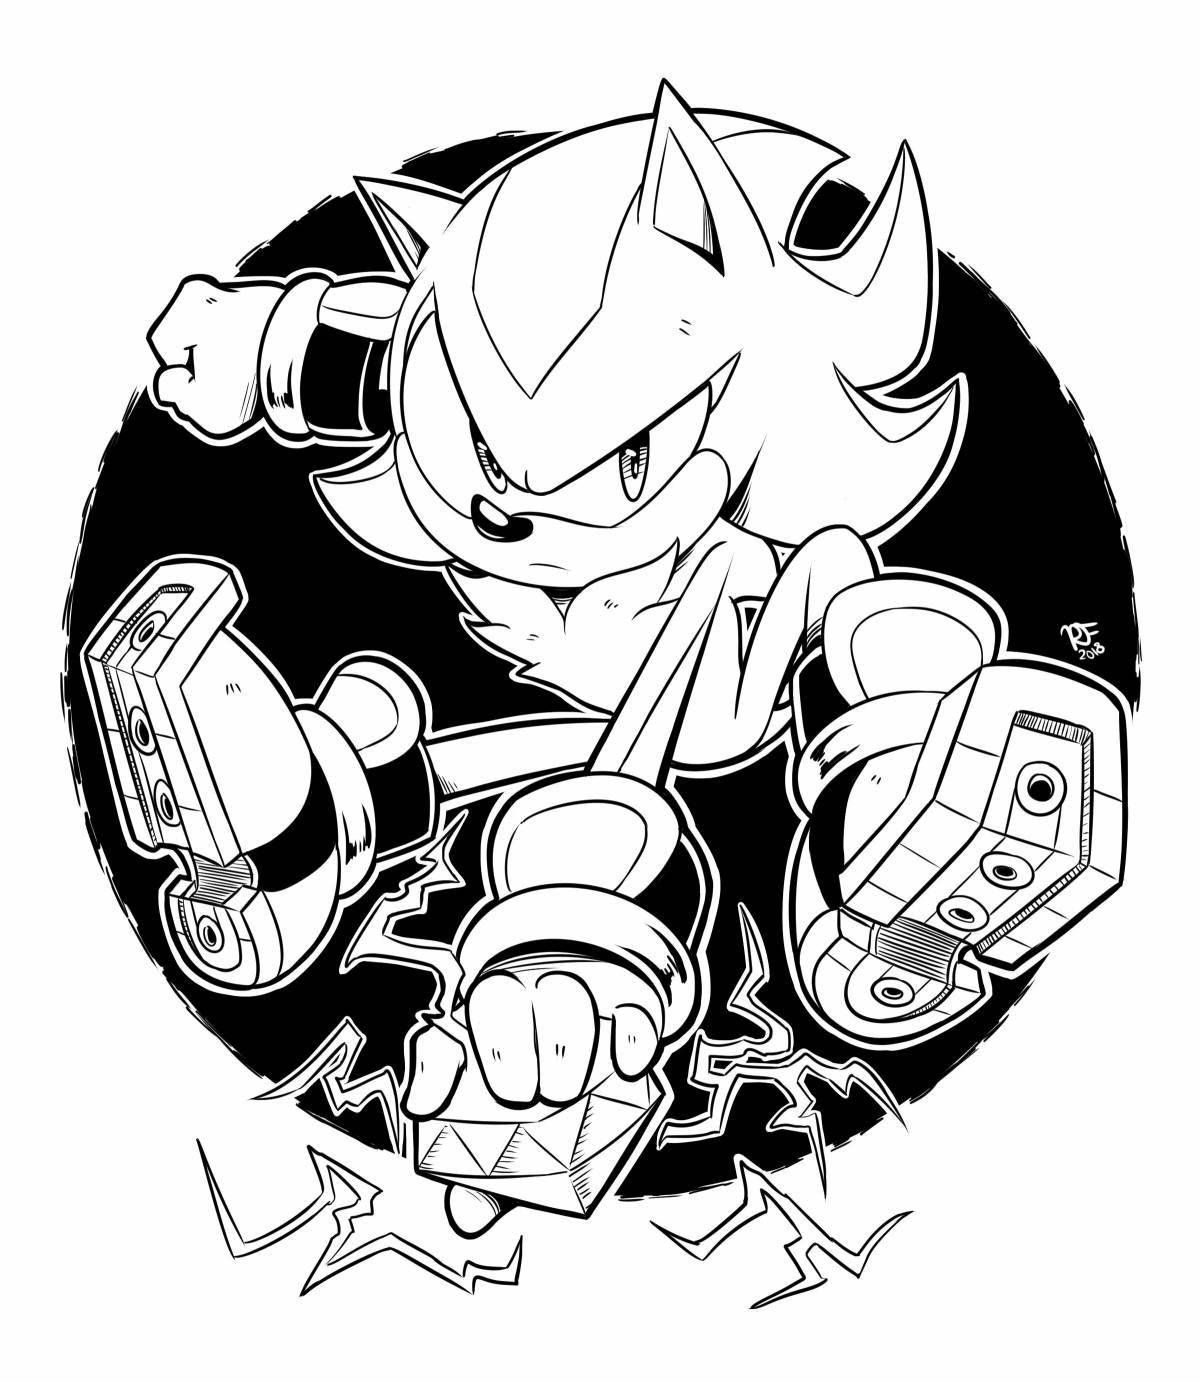 Excalibur sonic bright coloring page